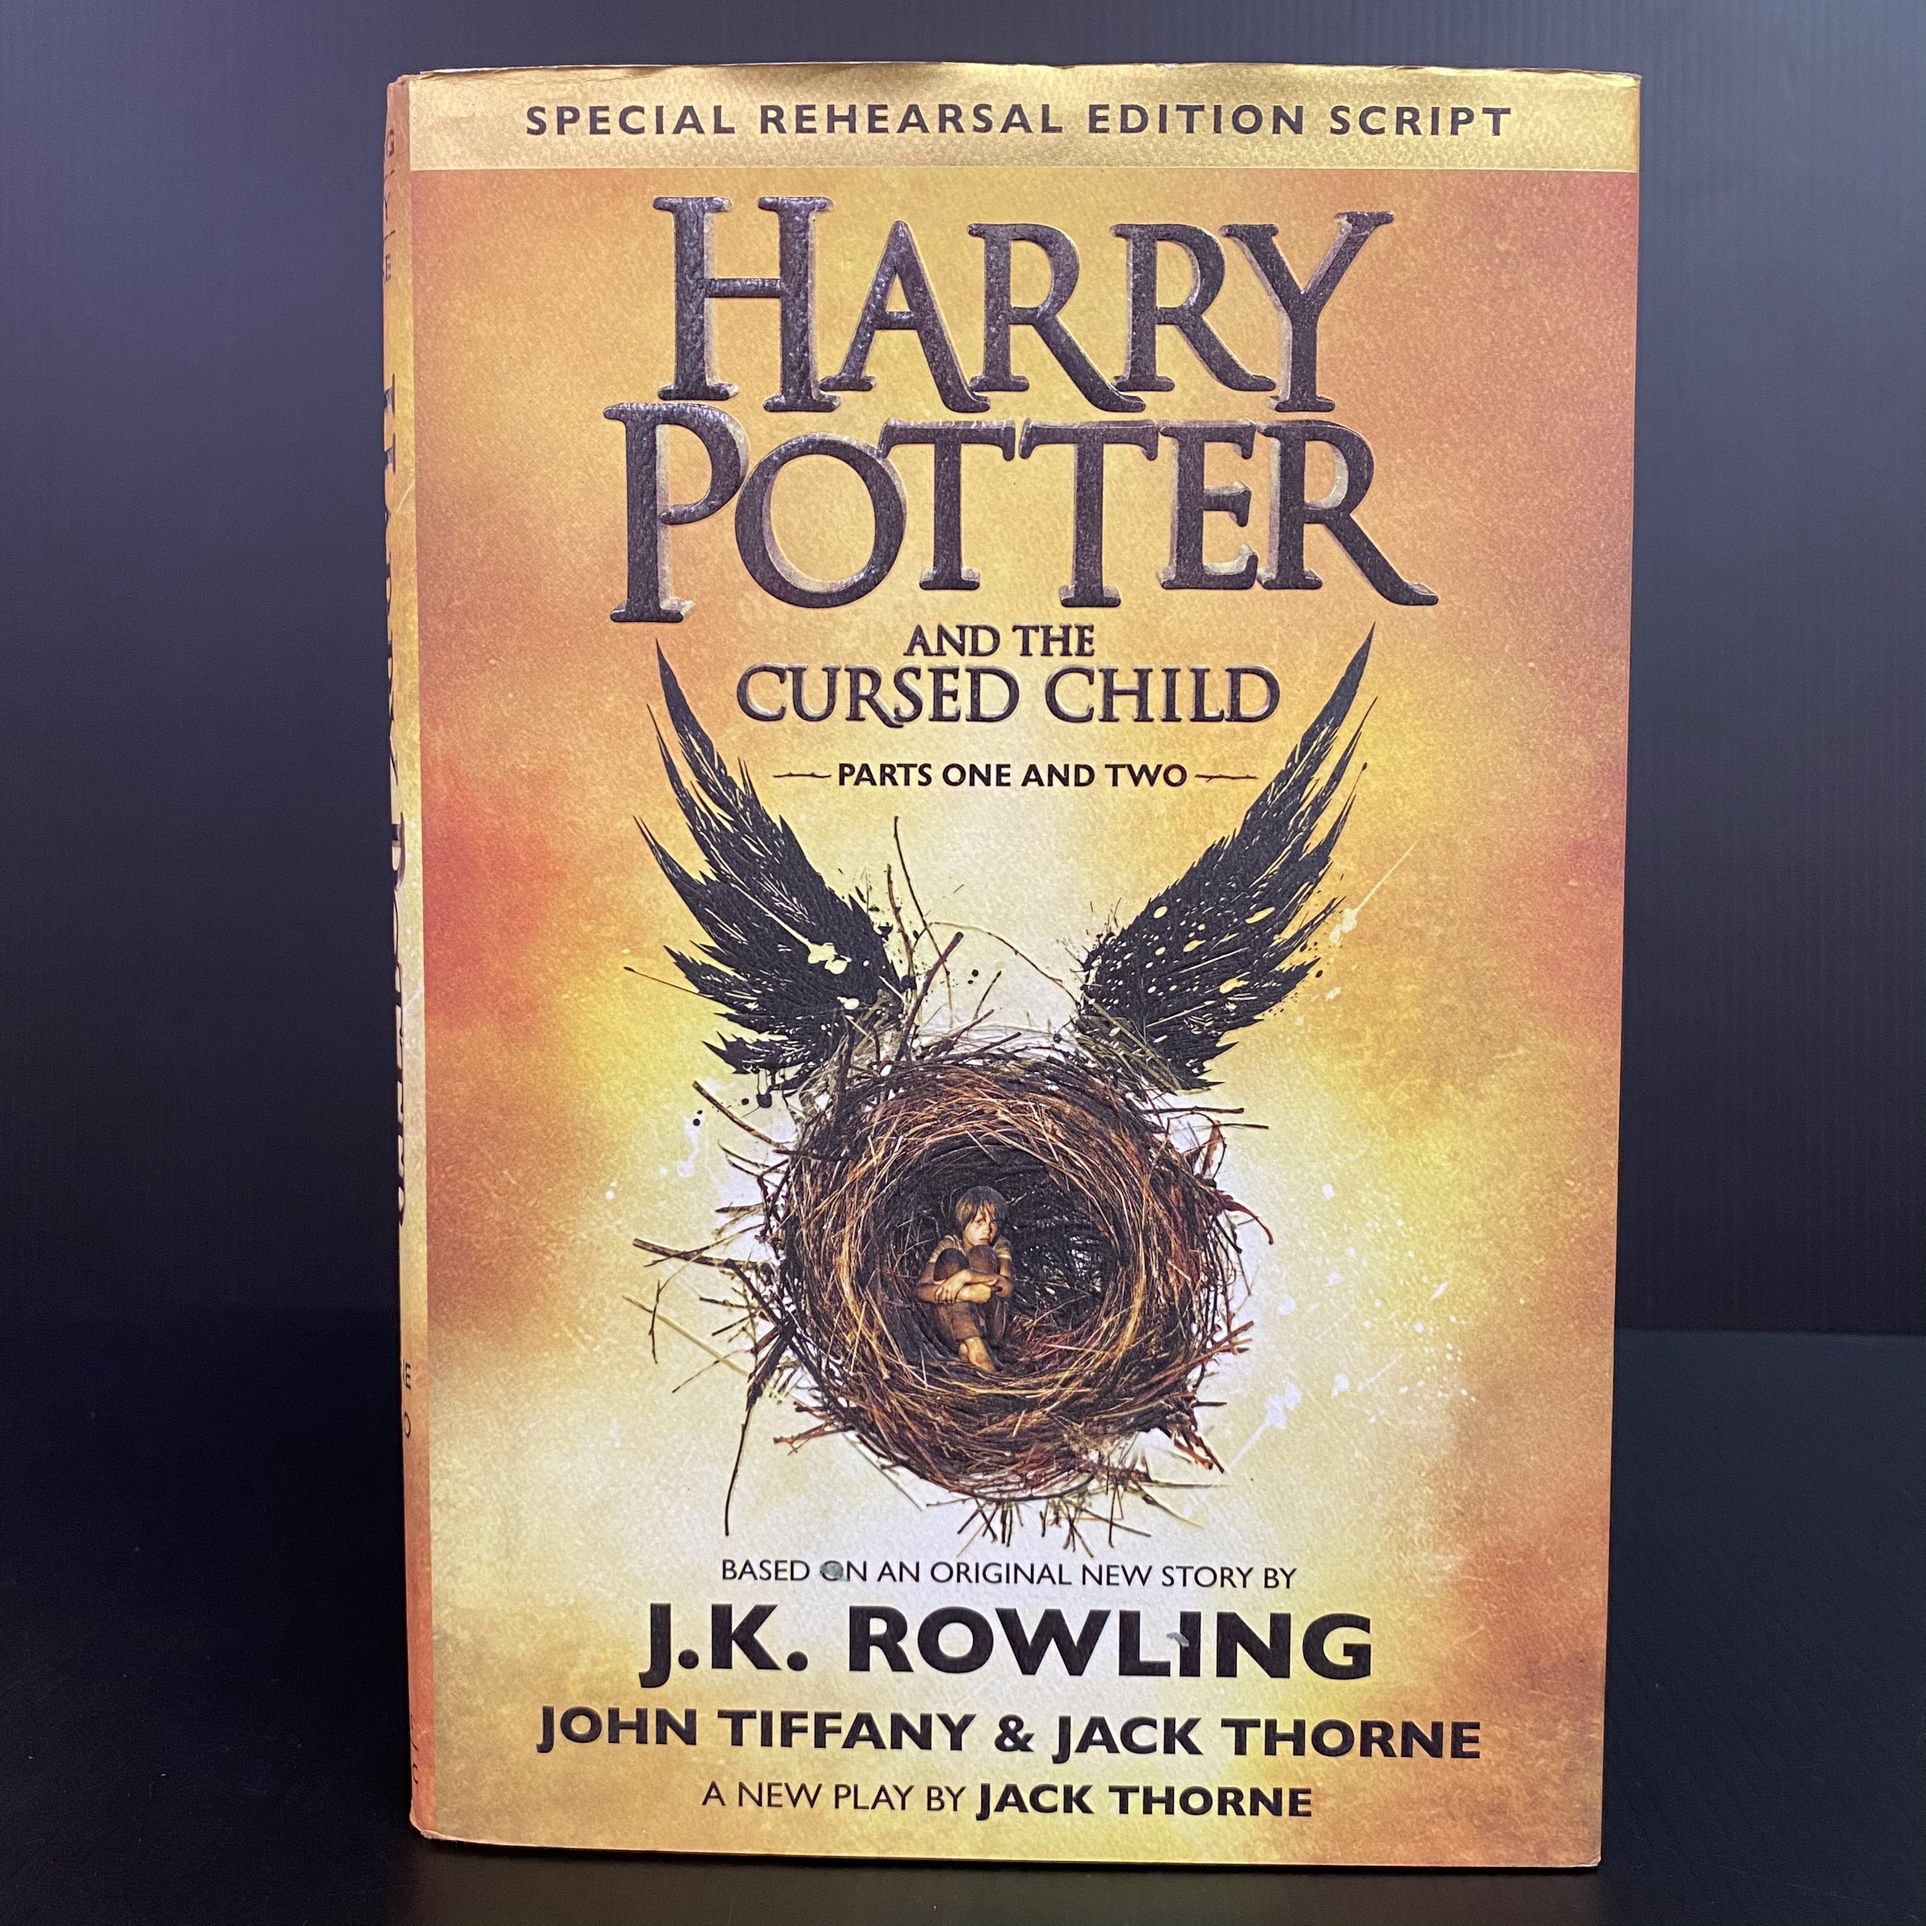 Harry Potter and the Cursed Child Parts 1 & 2 Special Rehearsal Edition Script Book by J.K. Rowling